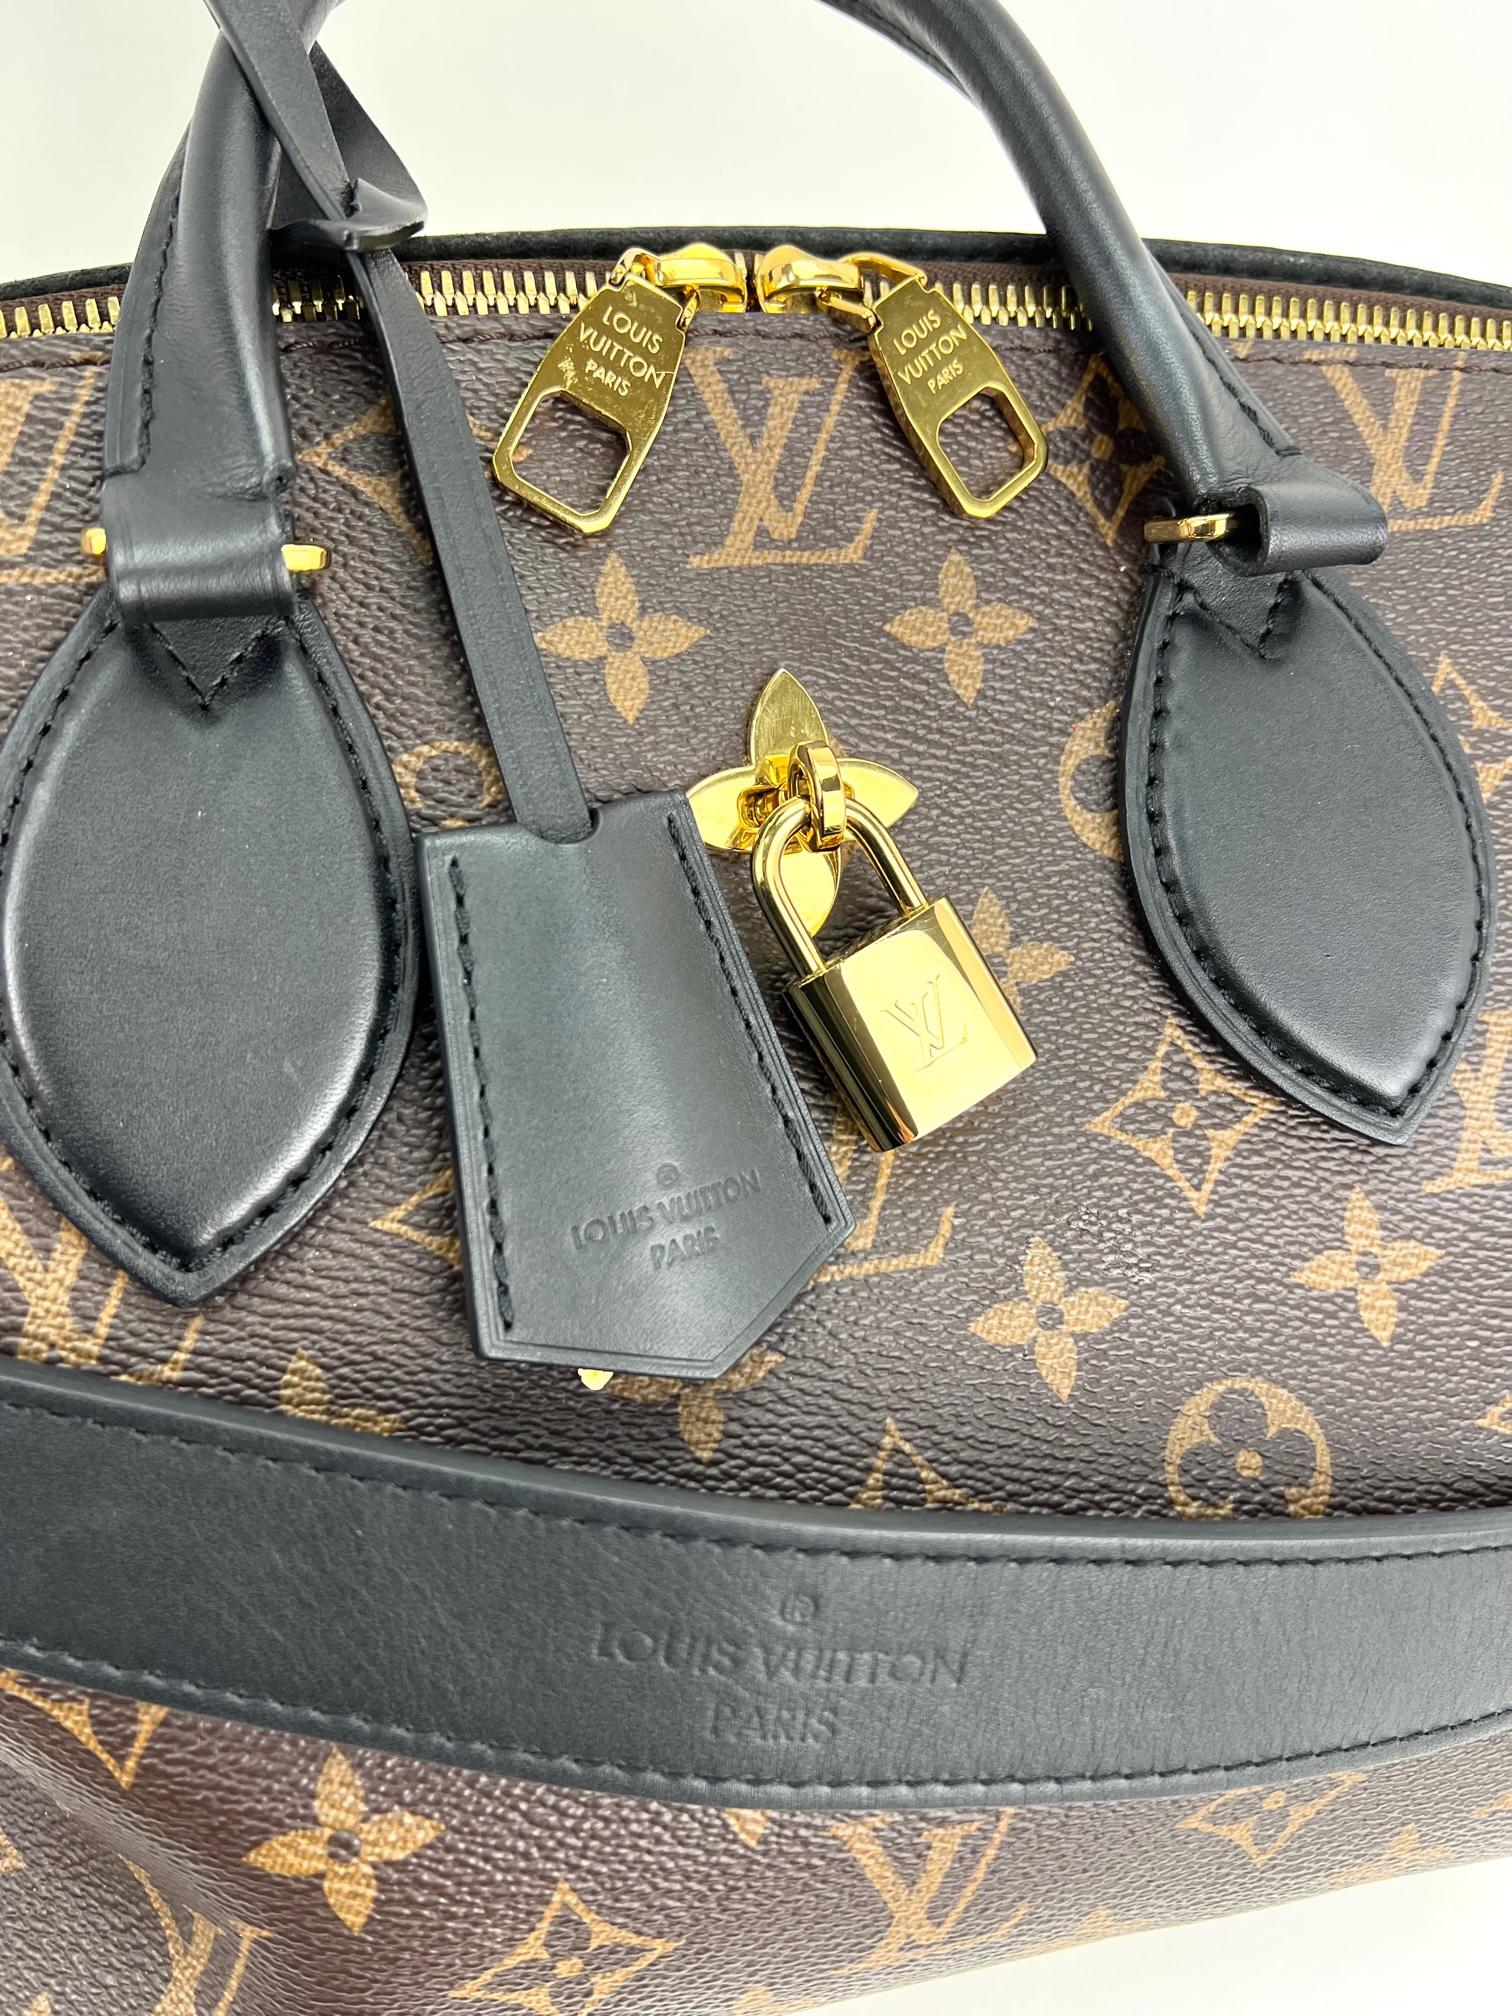 Pre-Owned  100% Authentic
LOUIS VUITTON Flower Zippered PM Monogram Tote
RATING: B...Very Good, well maintained,
shows minor signs of wear
MATERIAL: monogram canvas, leather trim
STRAP: LV removable leather strap
39'' long with 2 claw hooks on